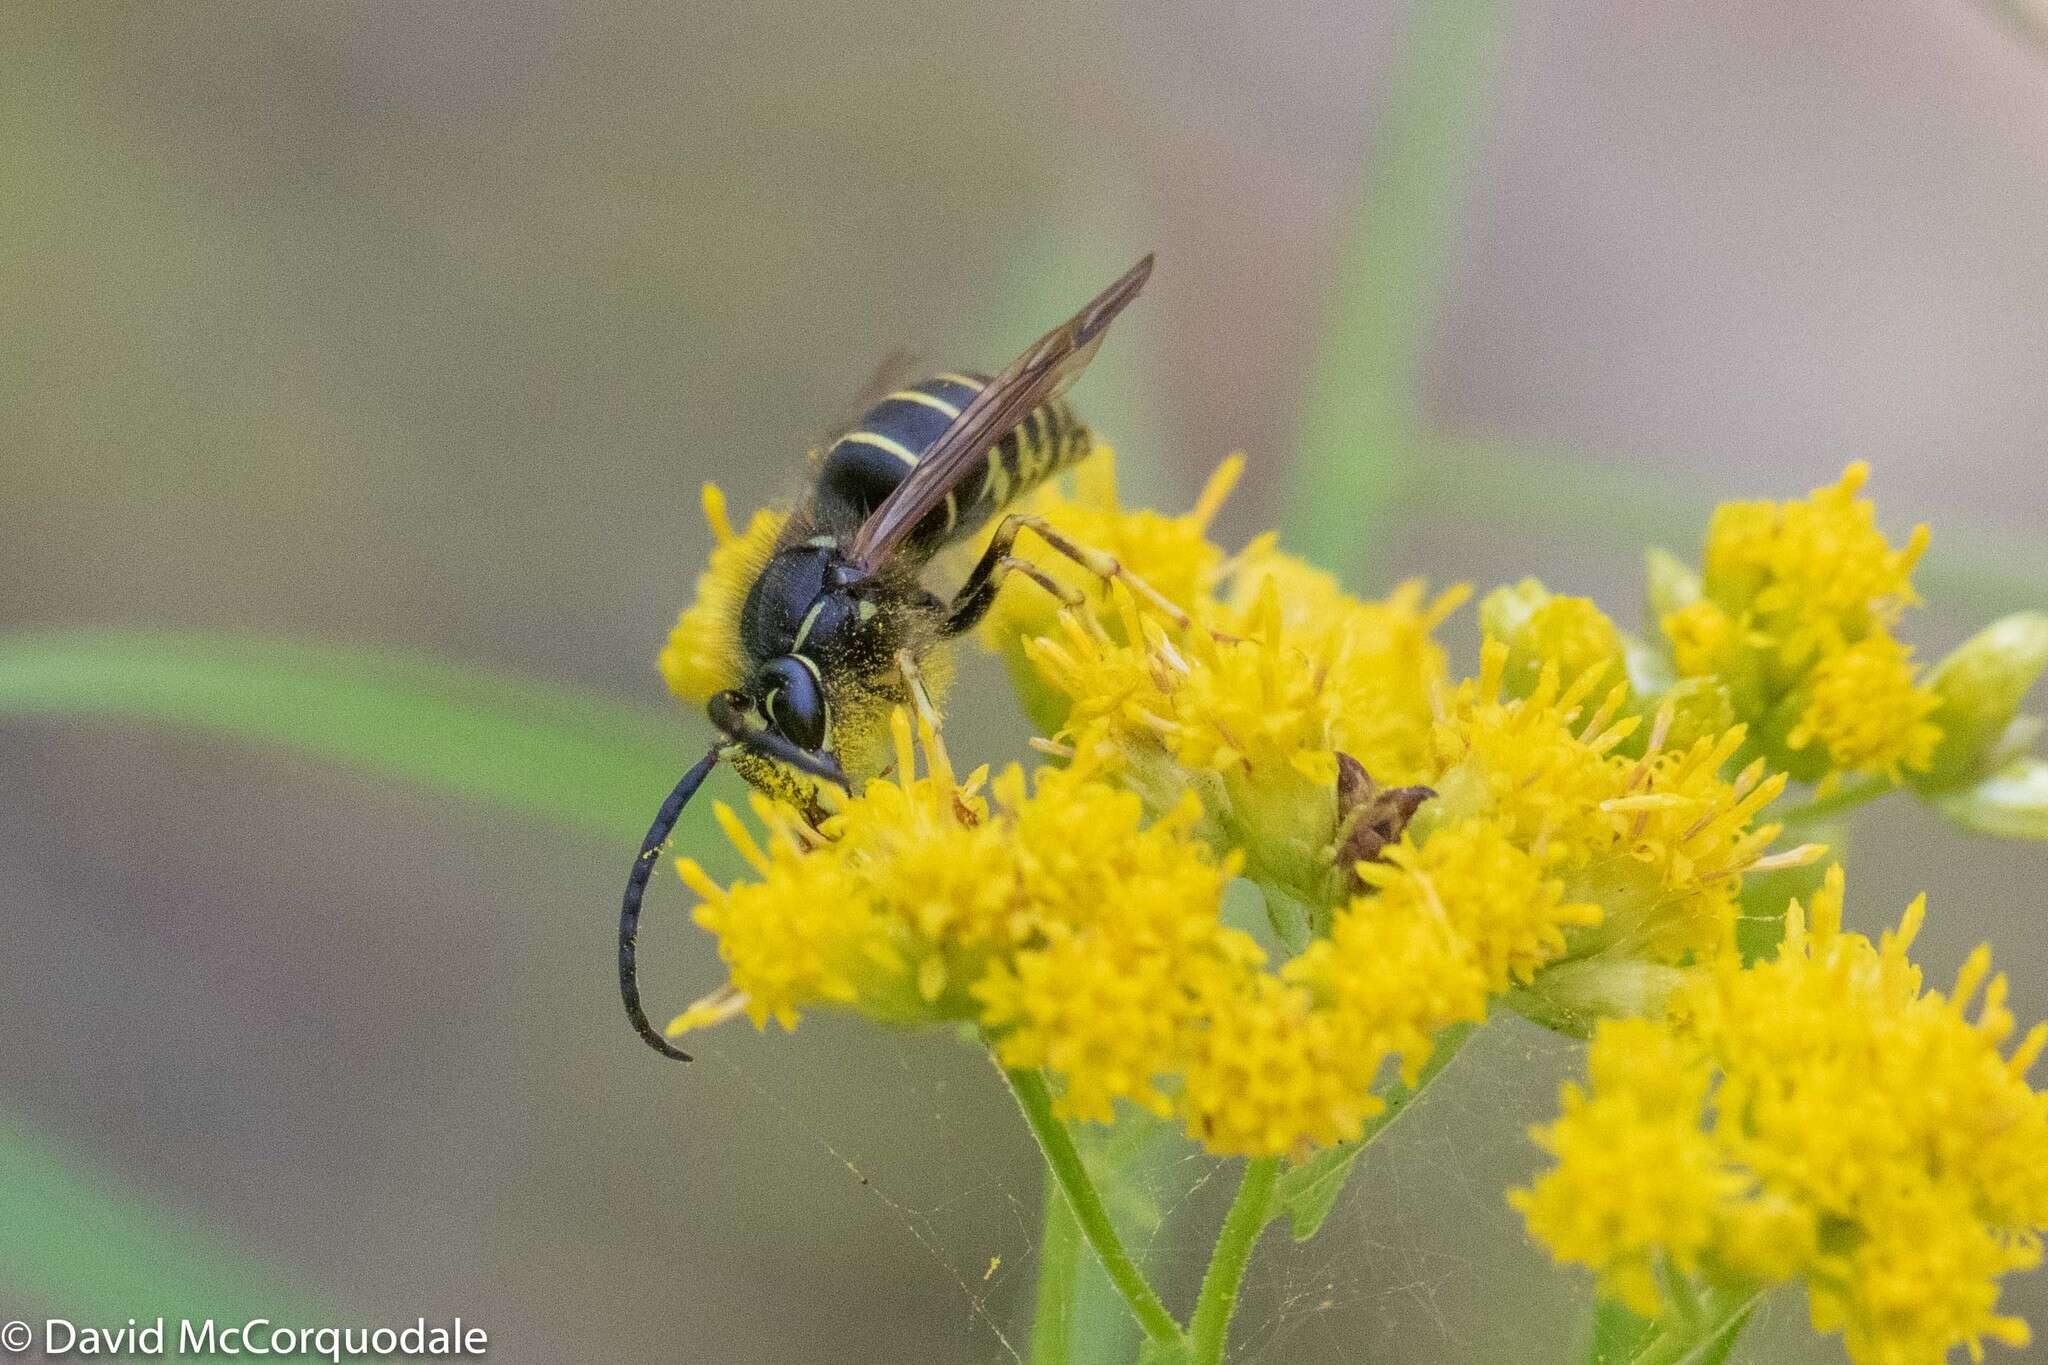 Image of Northern Aerial Yellowjacket